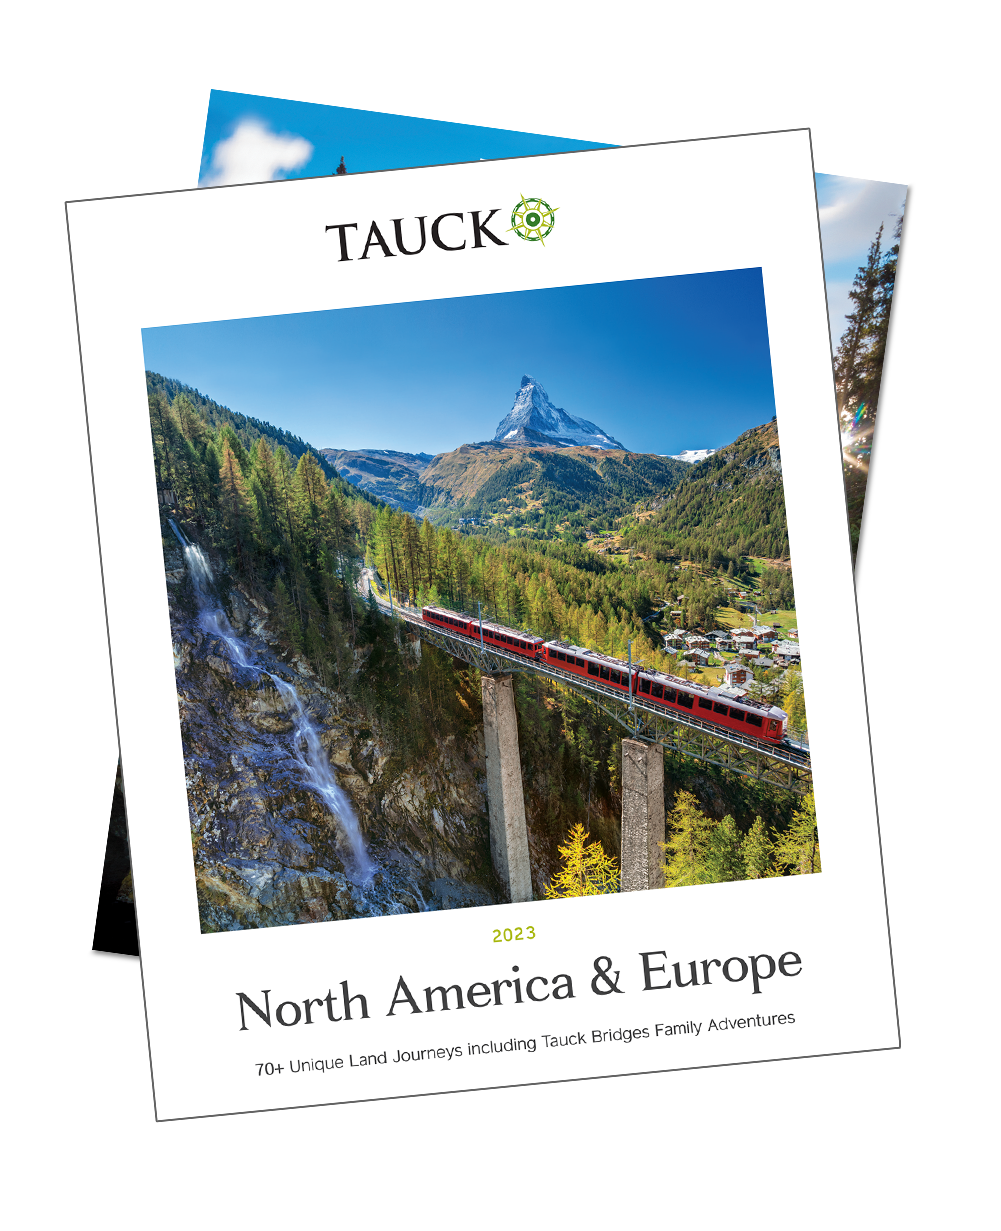 tauck tours in spain